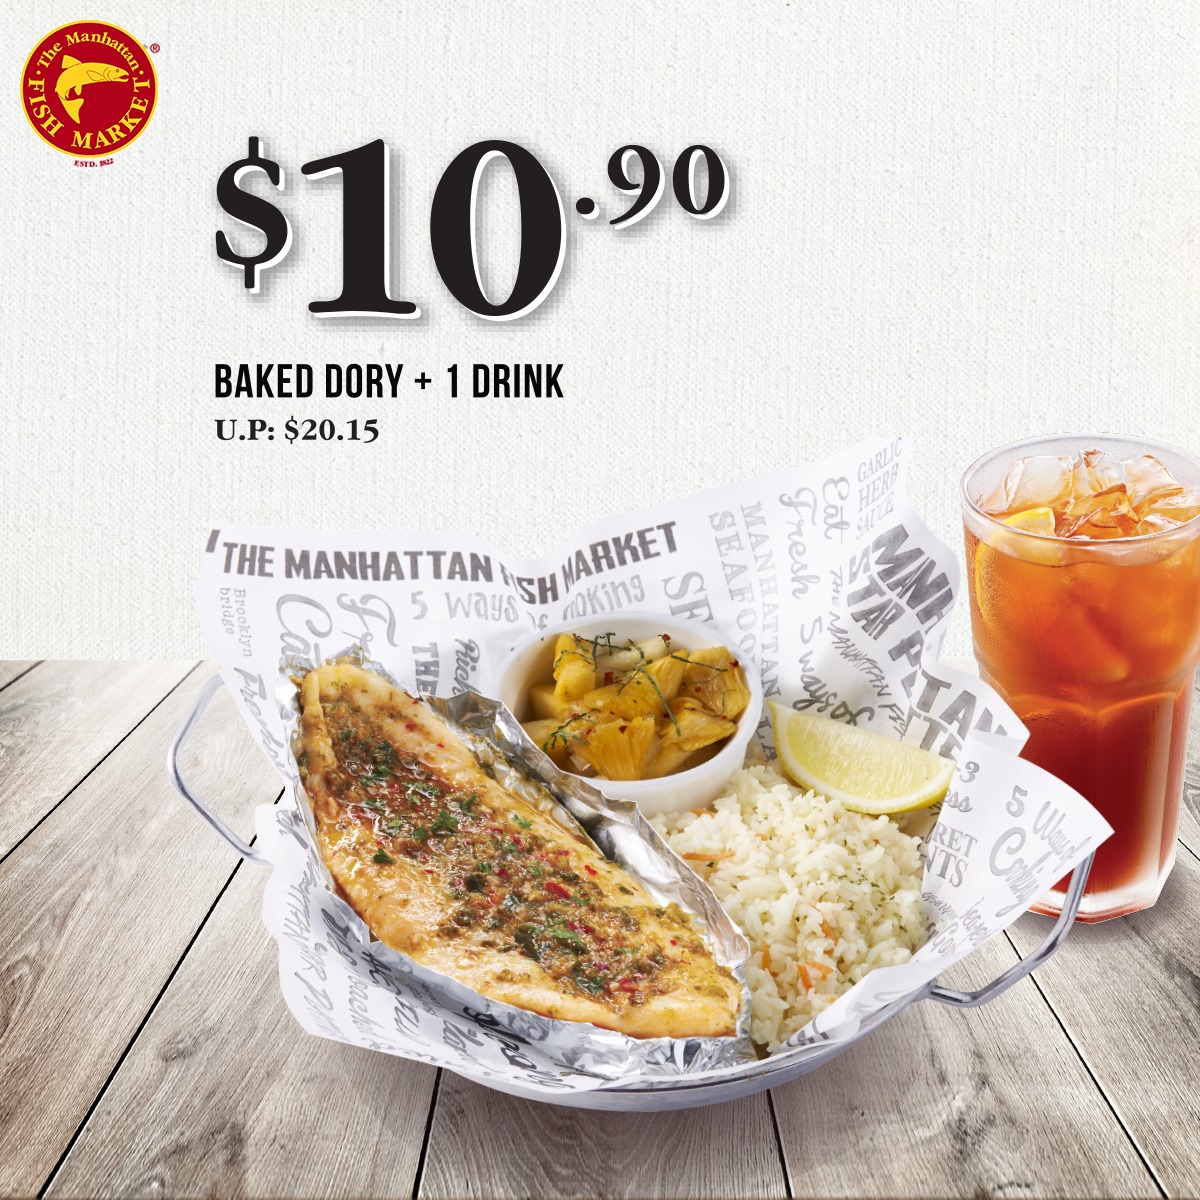 Flash these coupons from The Manhattan FISH MARKET on your mobile devices to enjoy great savings - 3